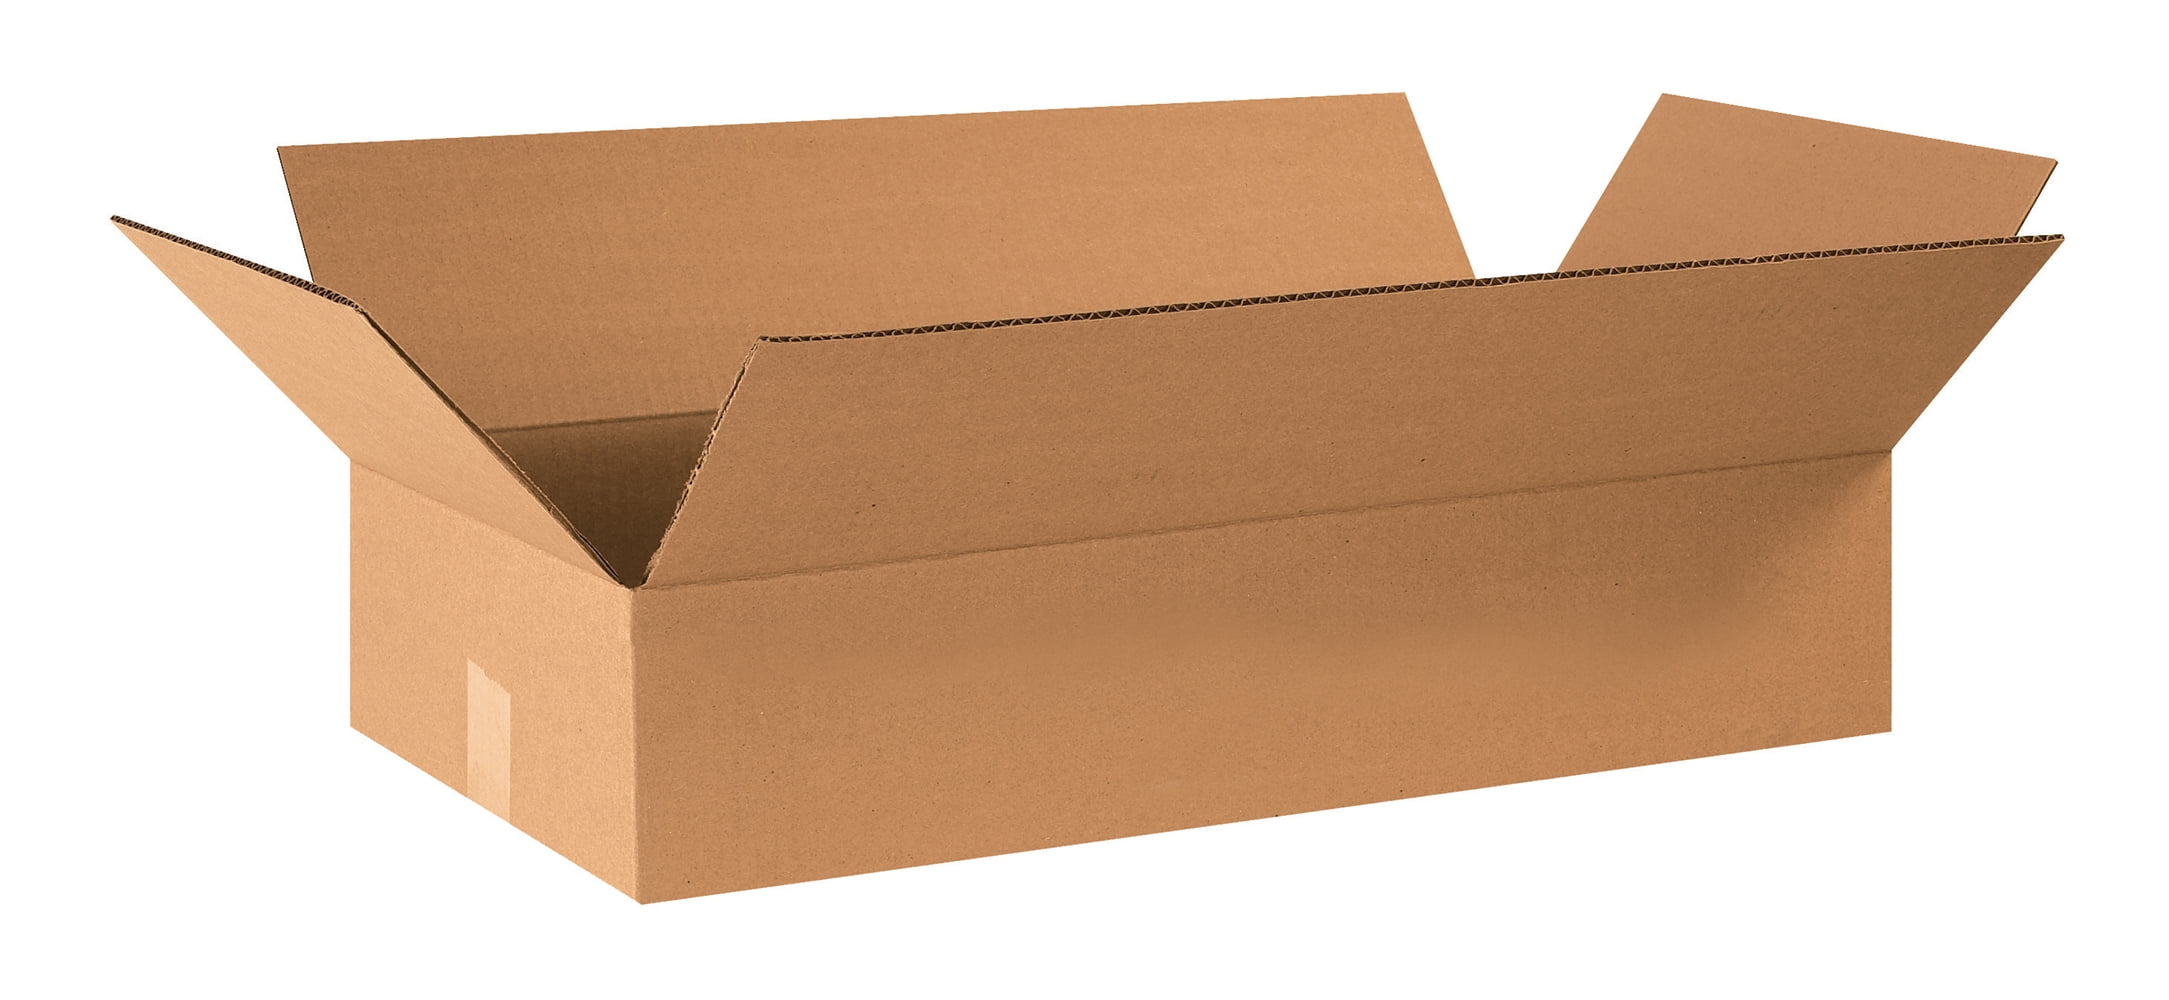 24X12X4 Cardboard Packing Mailing Shipping Corrugated Box Cartons Moving